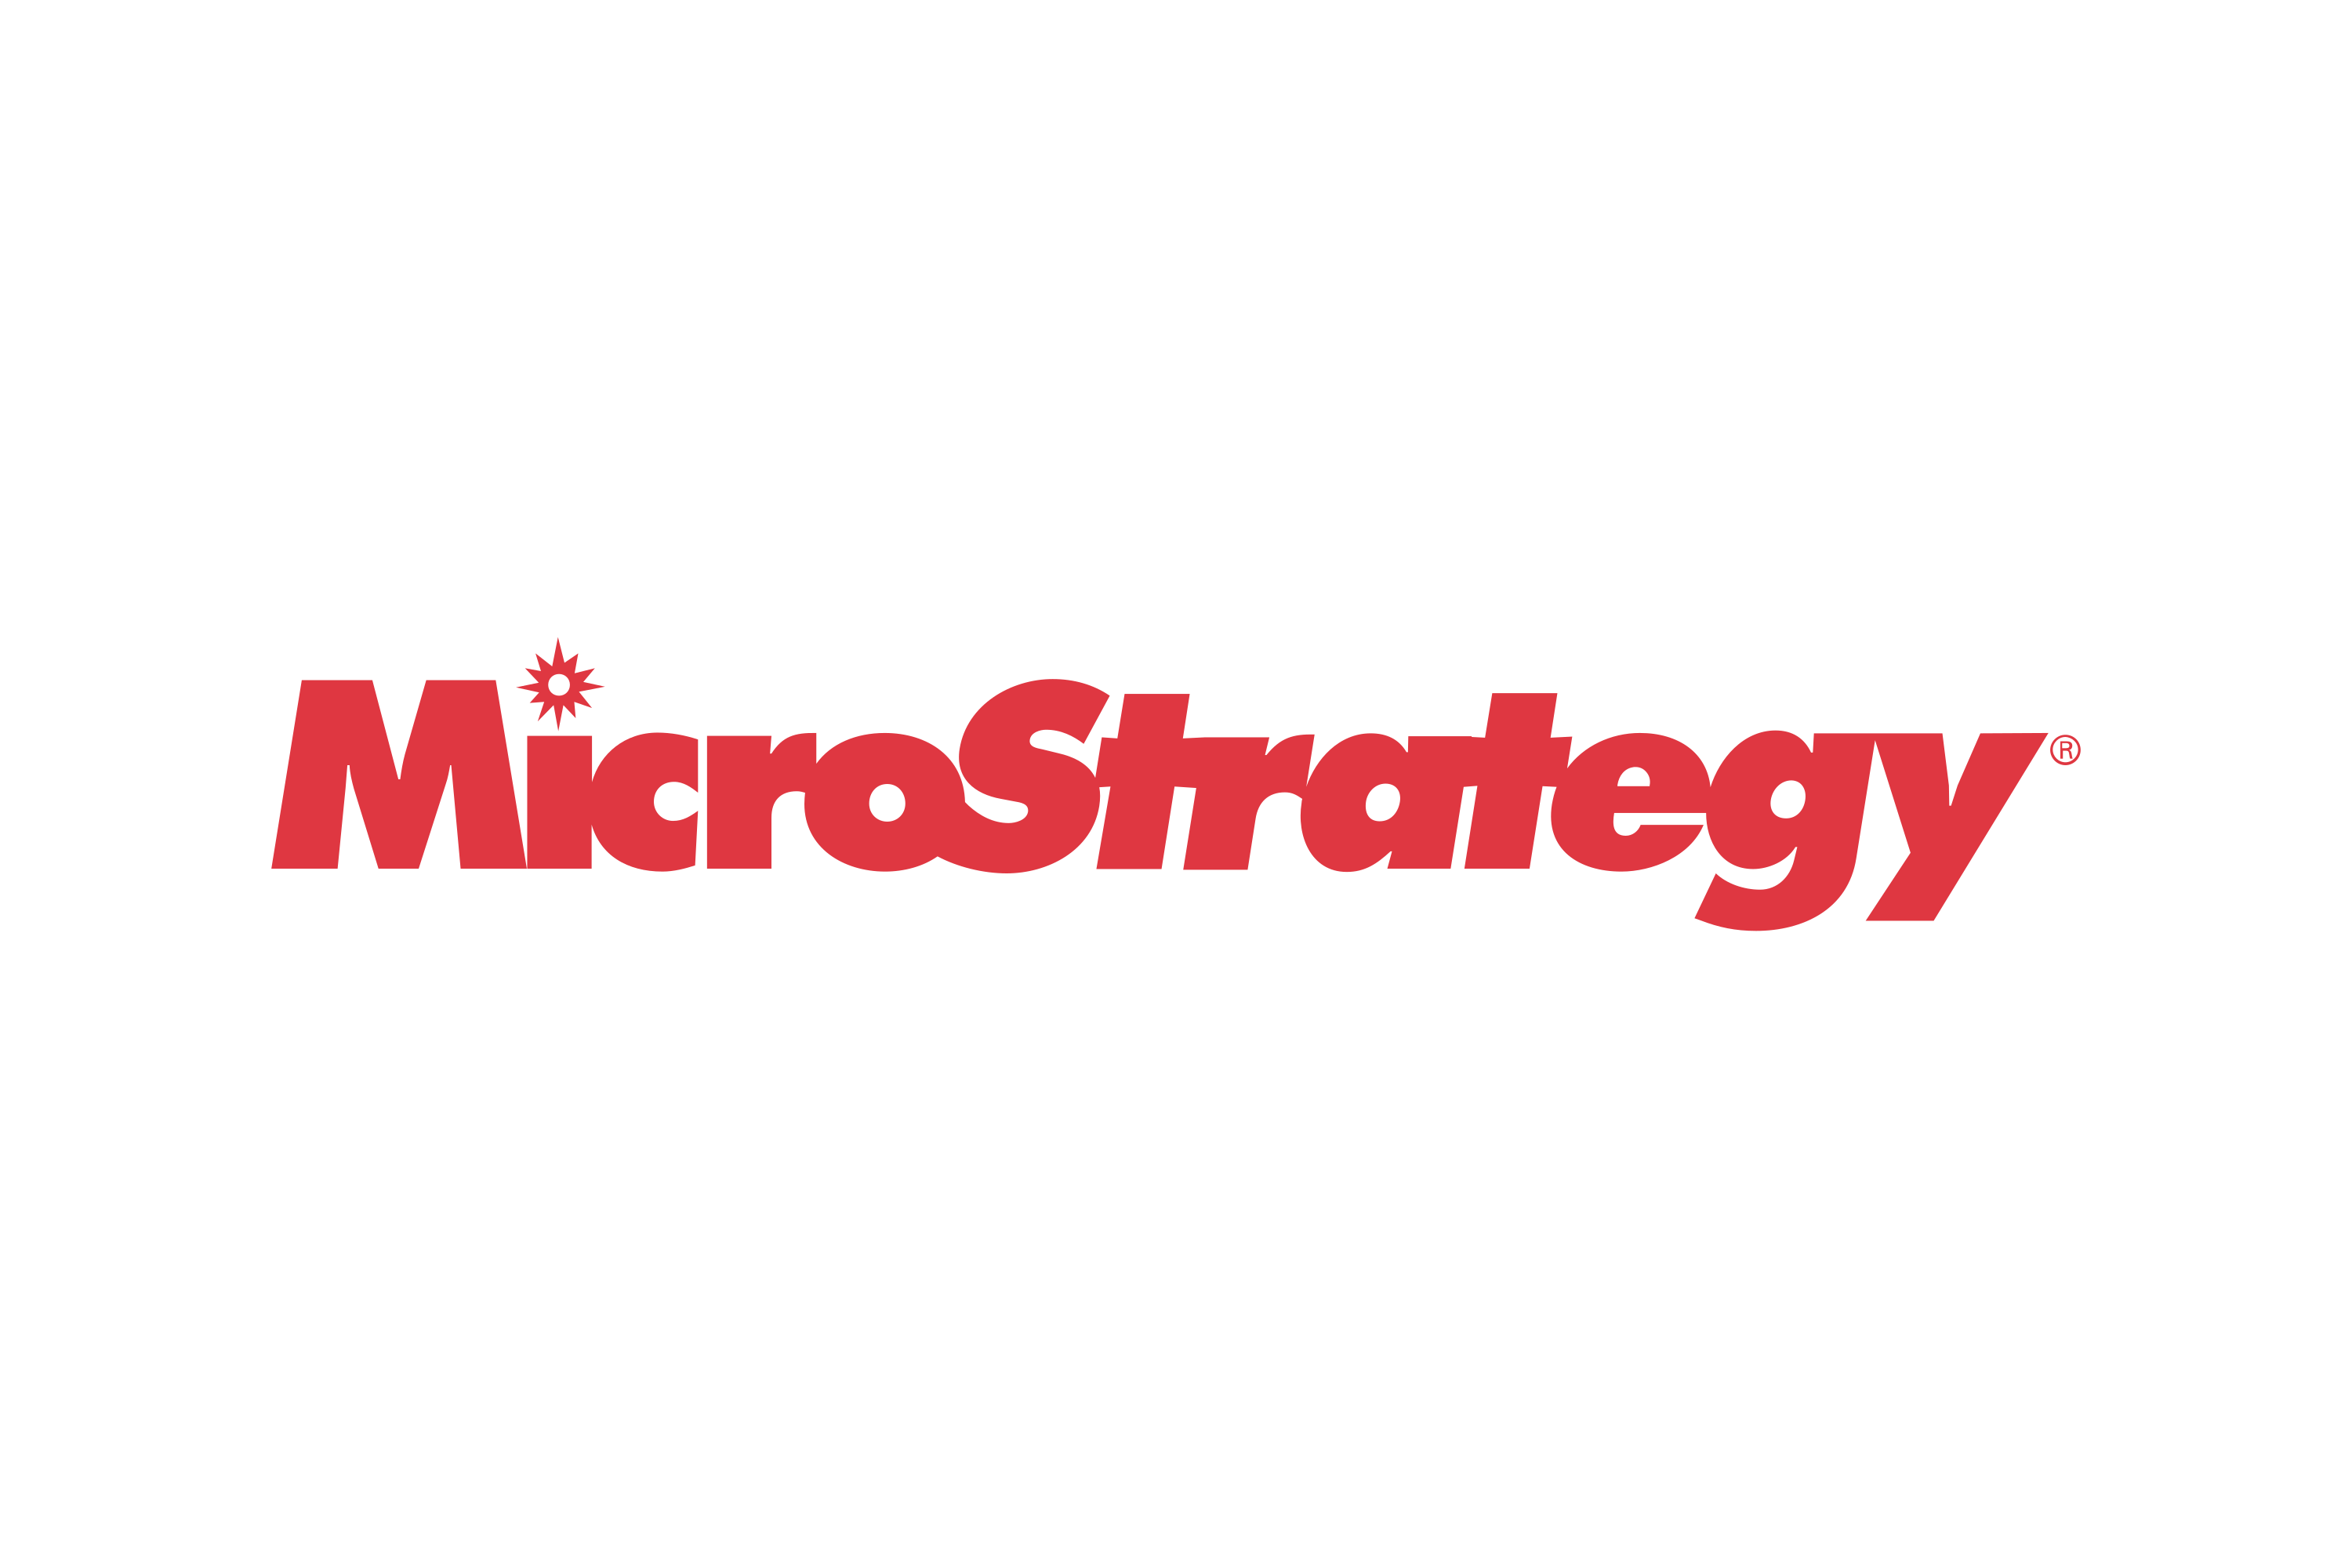 download microstrategy logo in svg vector or png file format - logo.wine